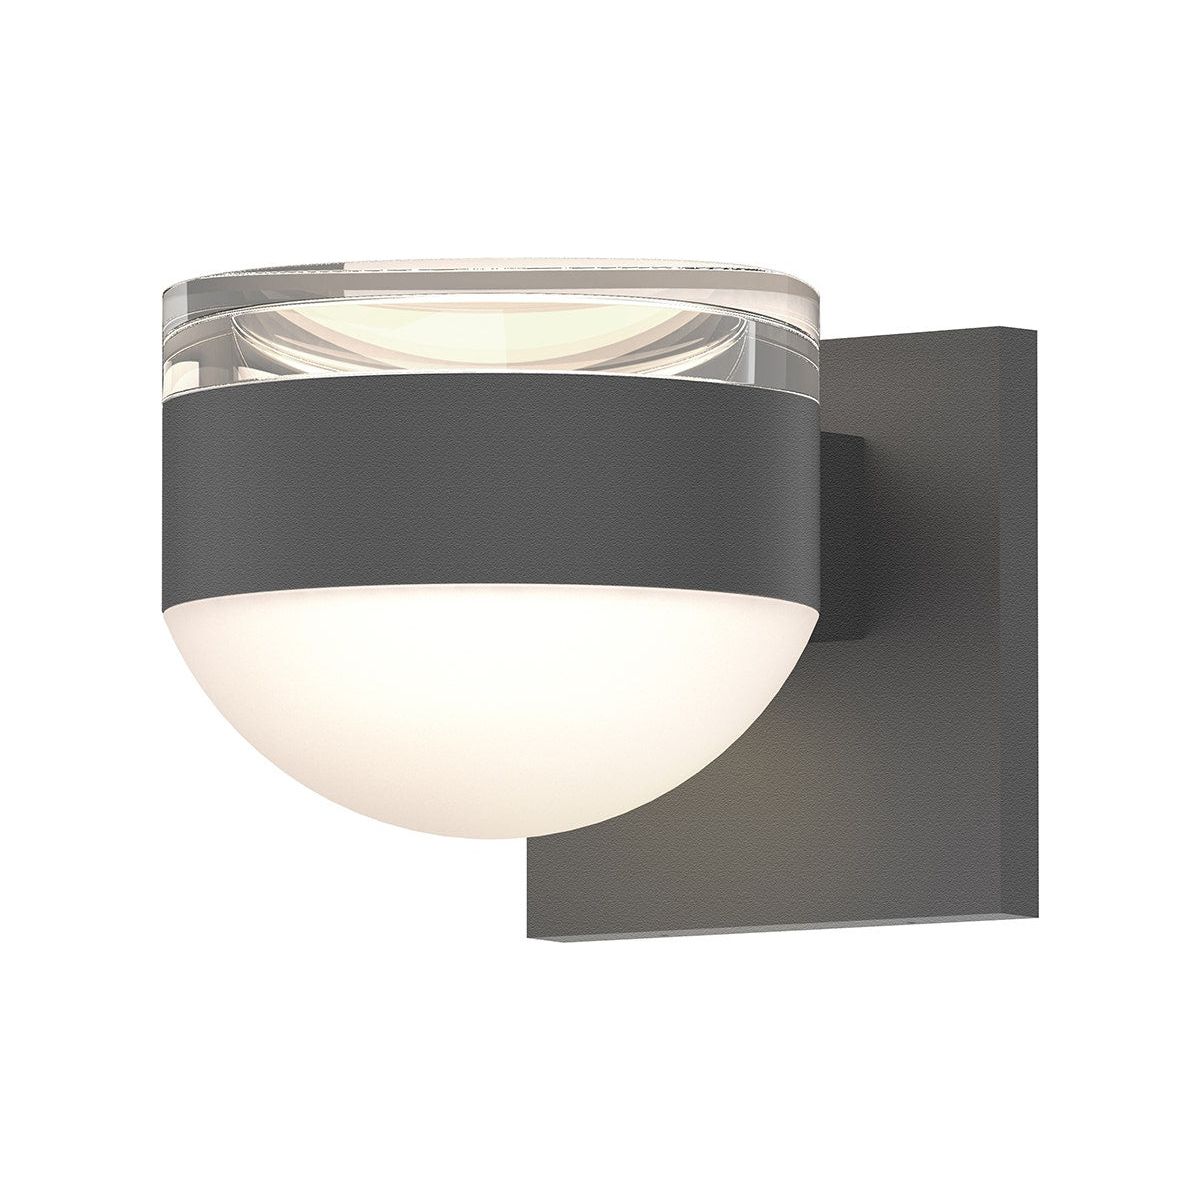 REALS Up/Down LED Sconce with Cylinder Top and Dome Bottom